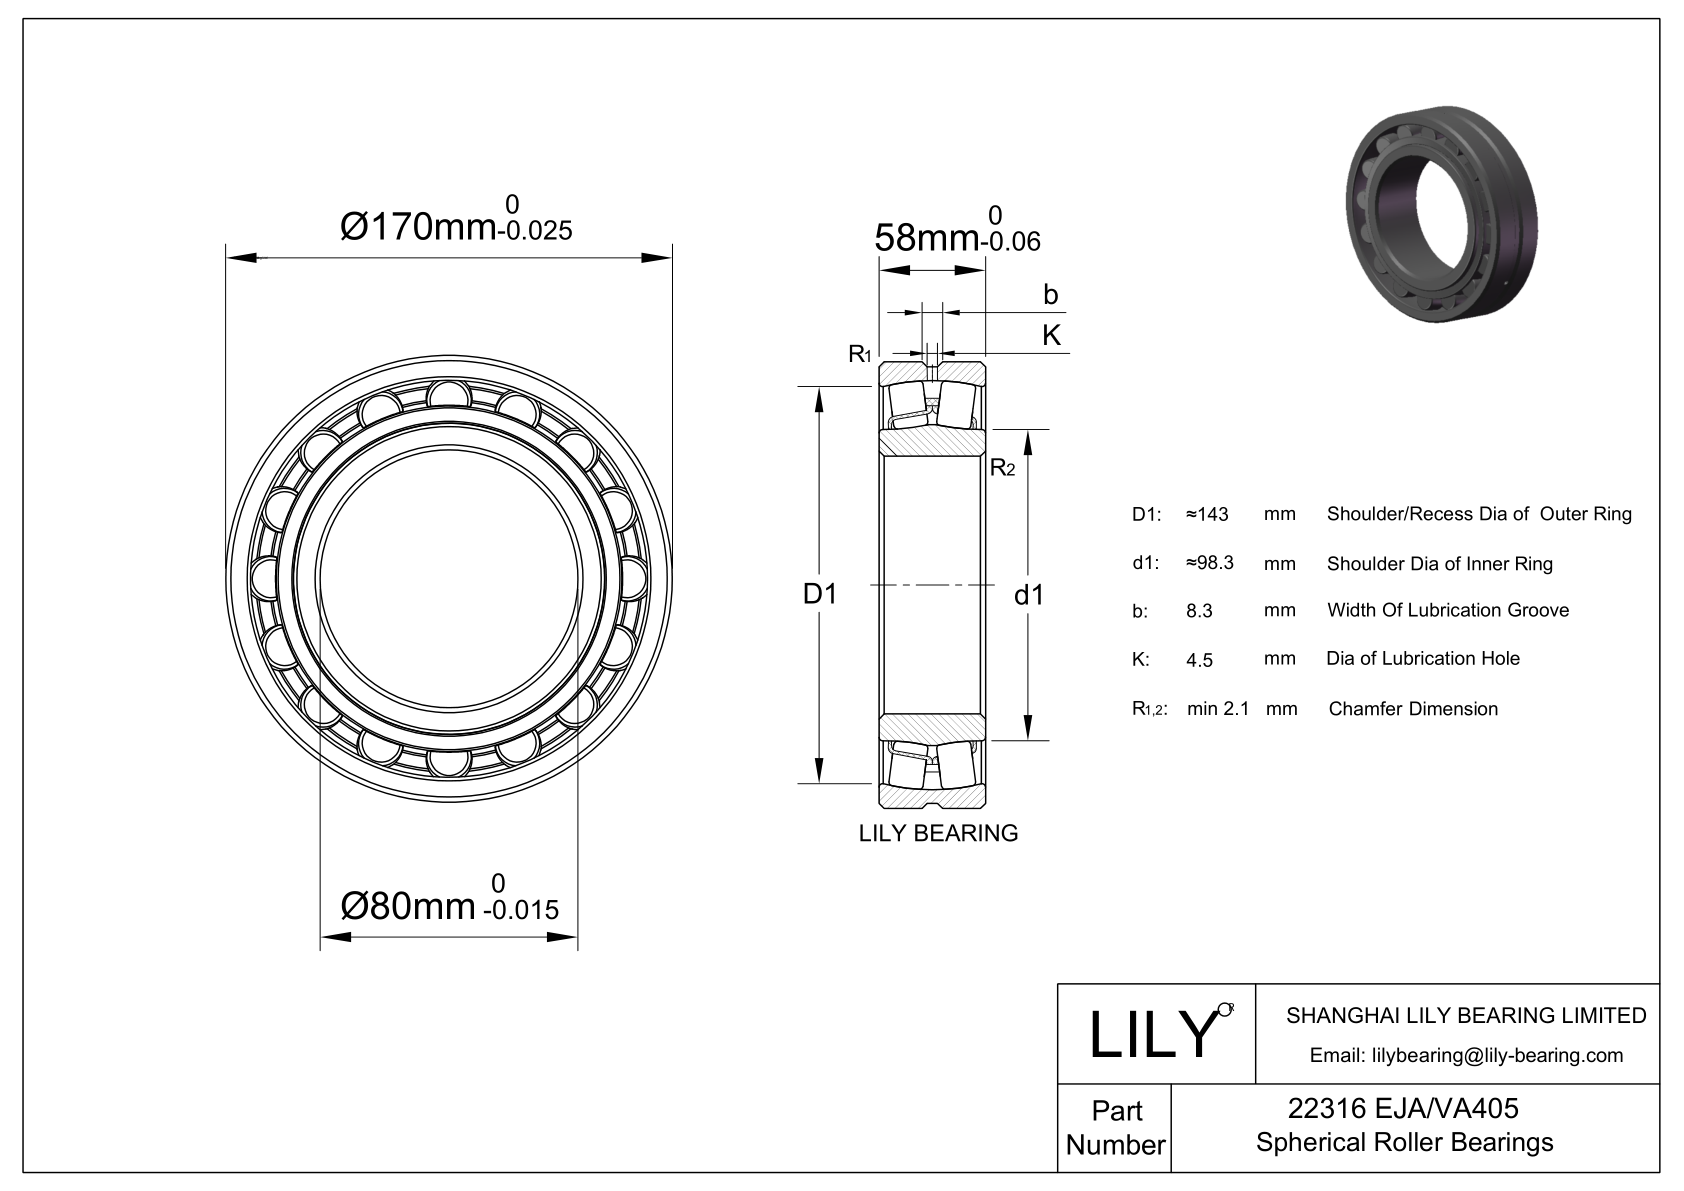 22316 EJA/VA405 Double Row Spherical Roller Bearing cad drawing